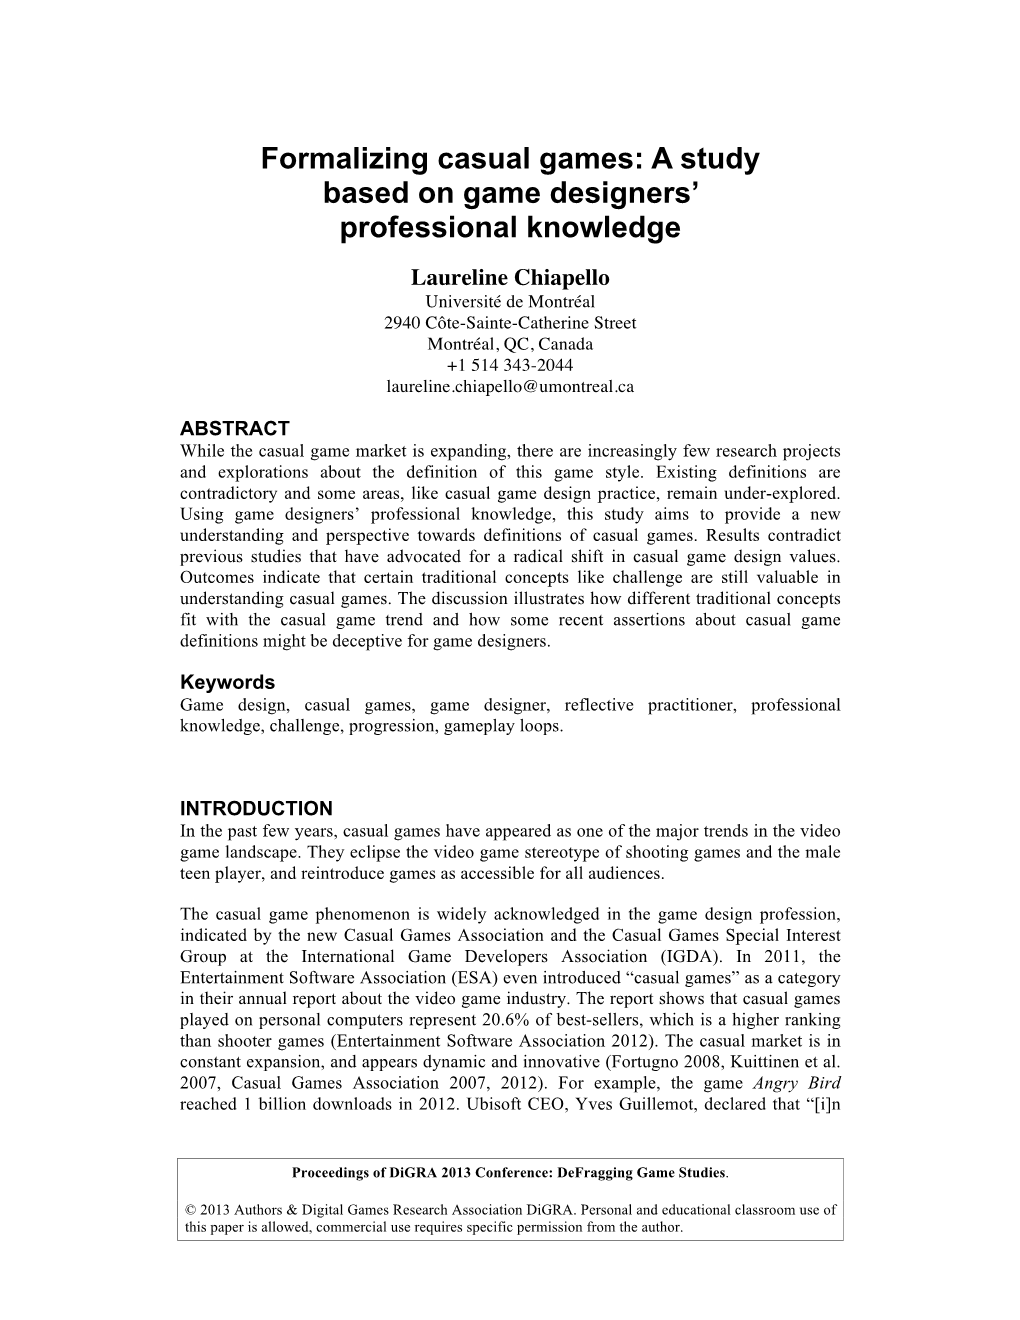 Formalizing Casual Games: a Study Based on Game Designers’ Professional Knowledge